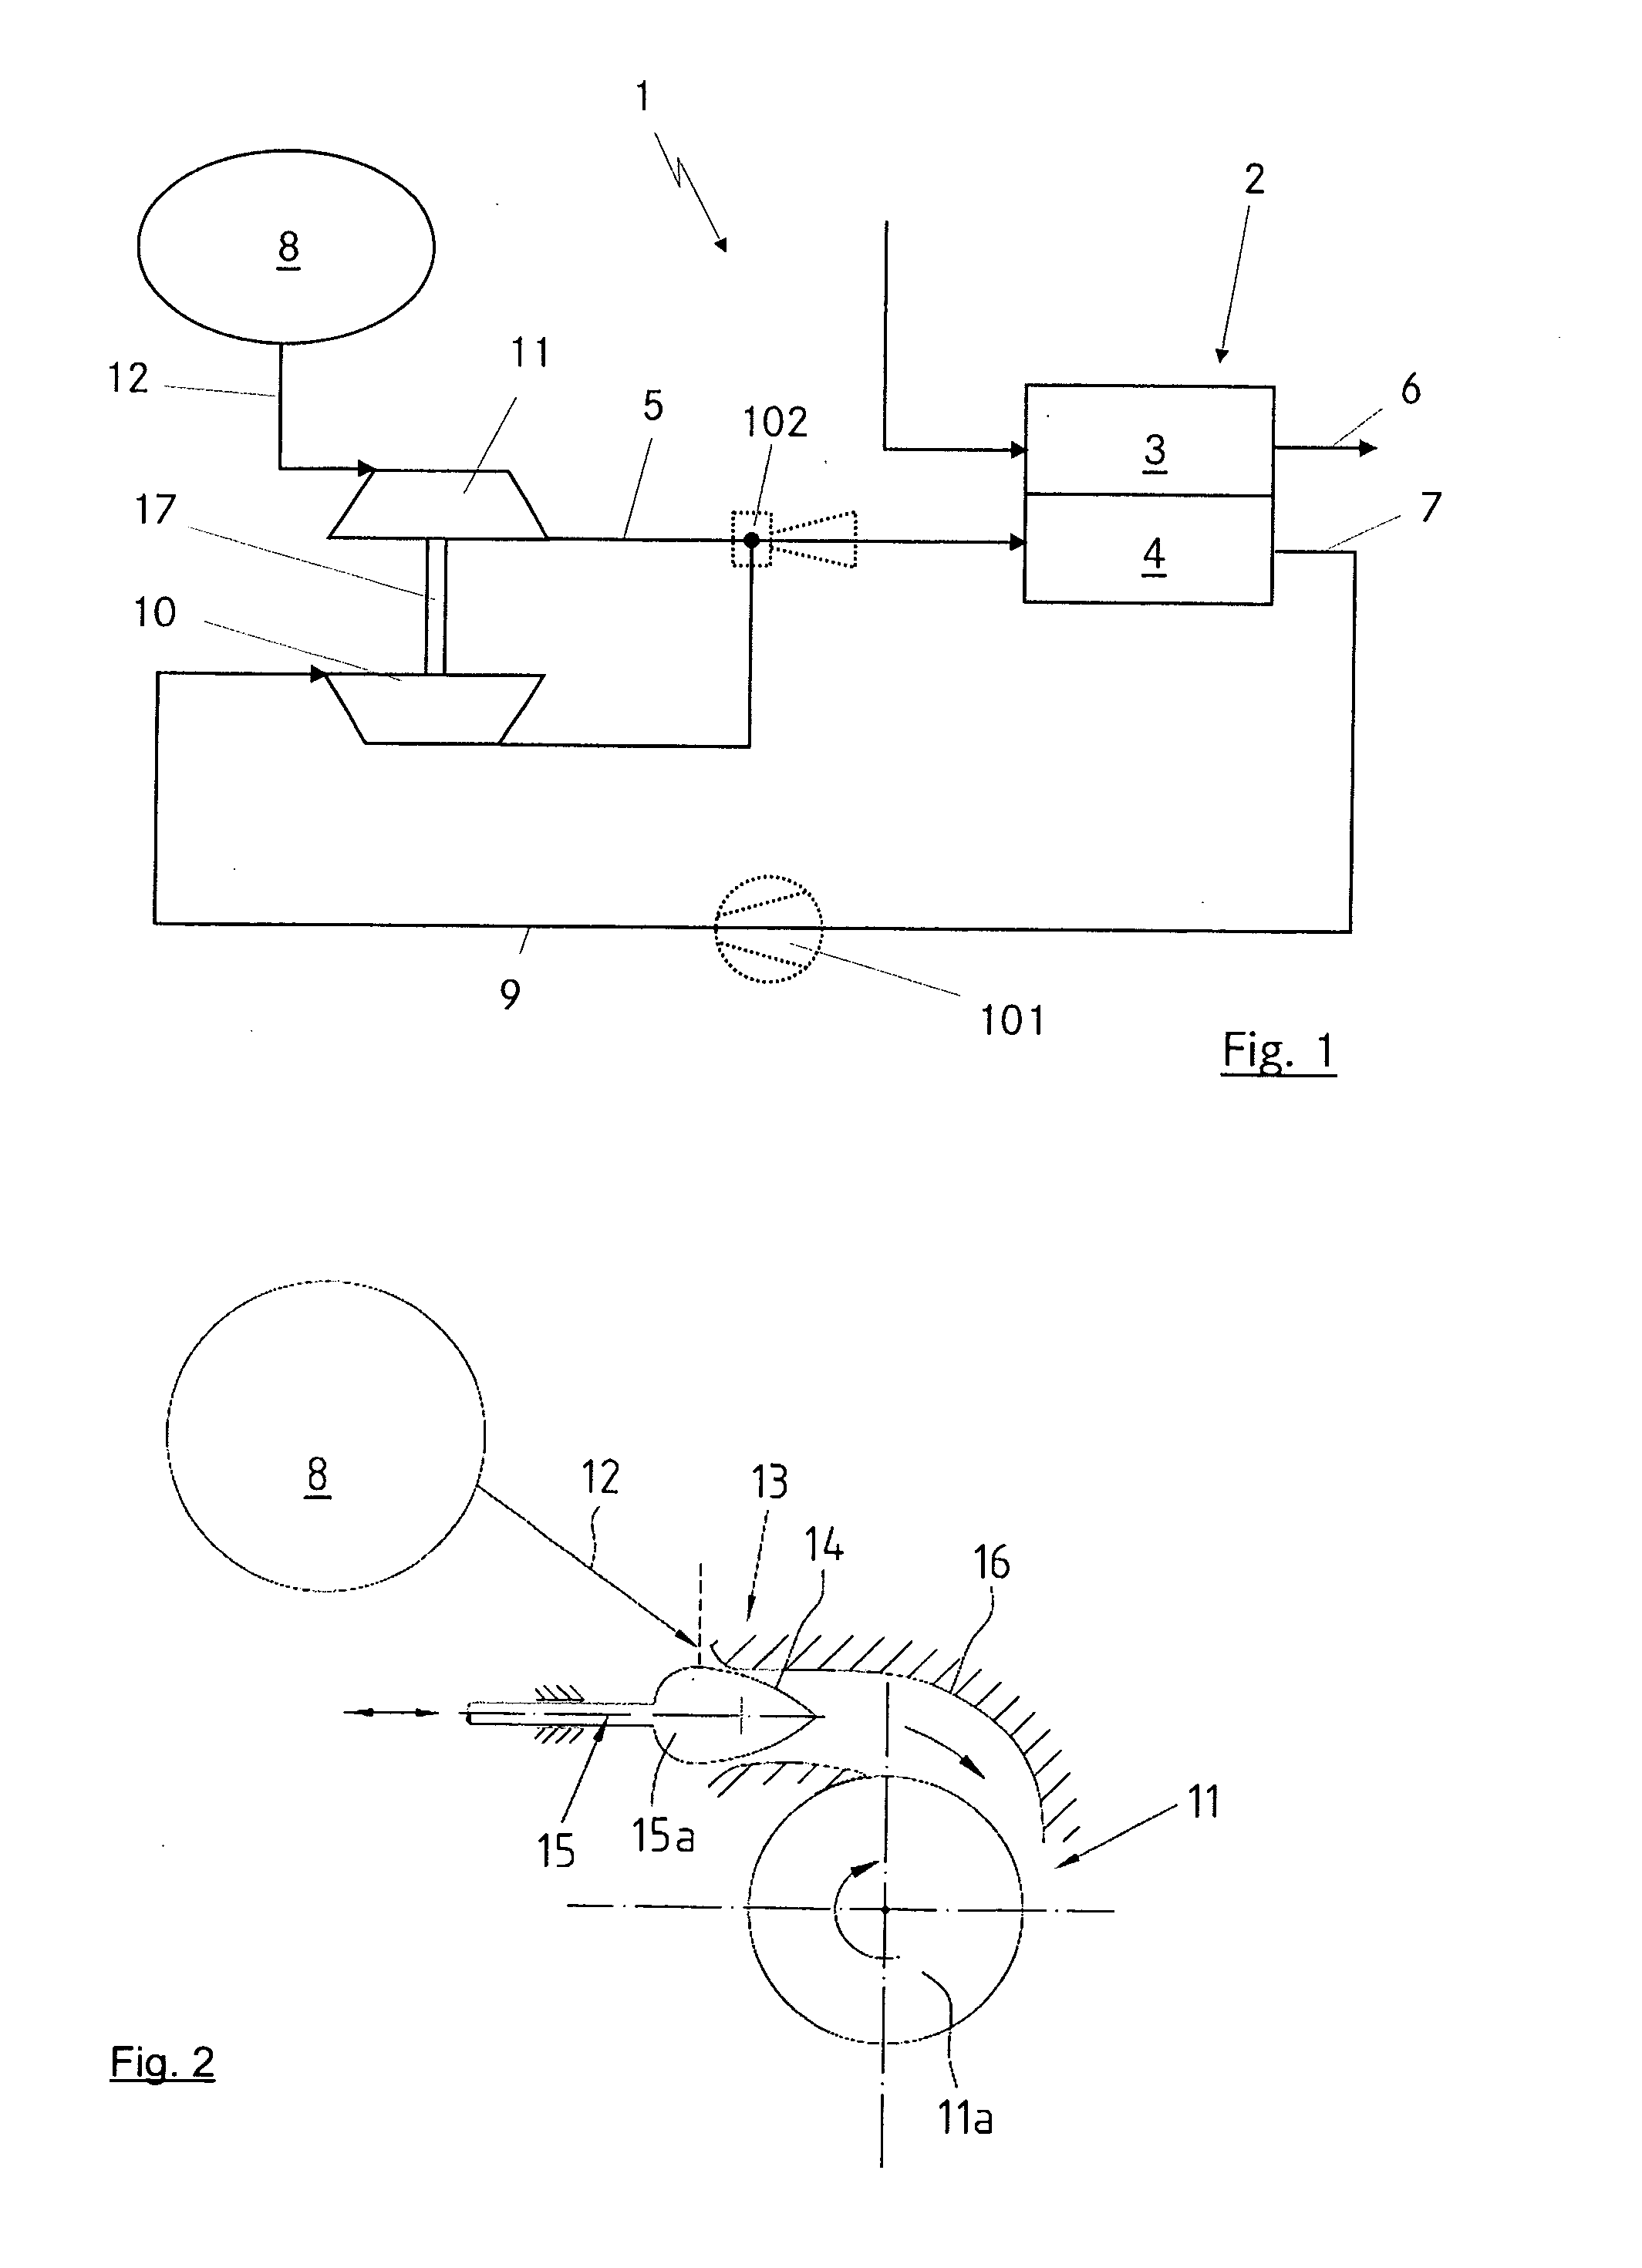 Fuel cell system having a fuel cell, a hydrogen storage tank, and an anode circuit